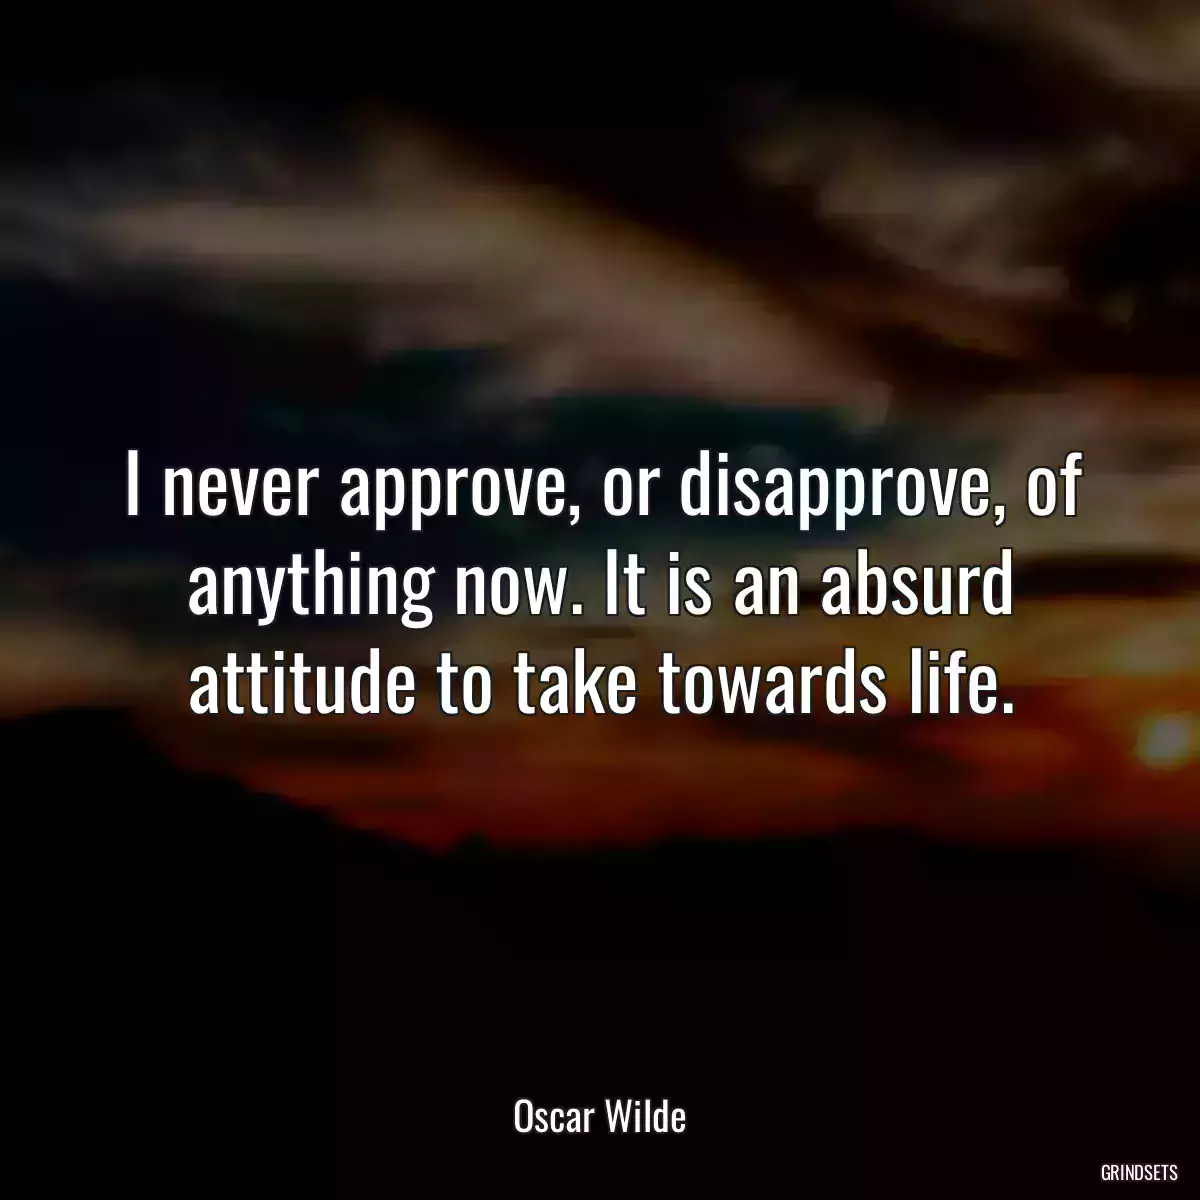 I never approve, or disapprove, of anything now. It is an absurd attitude to take towards life.